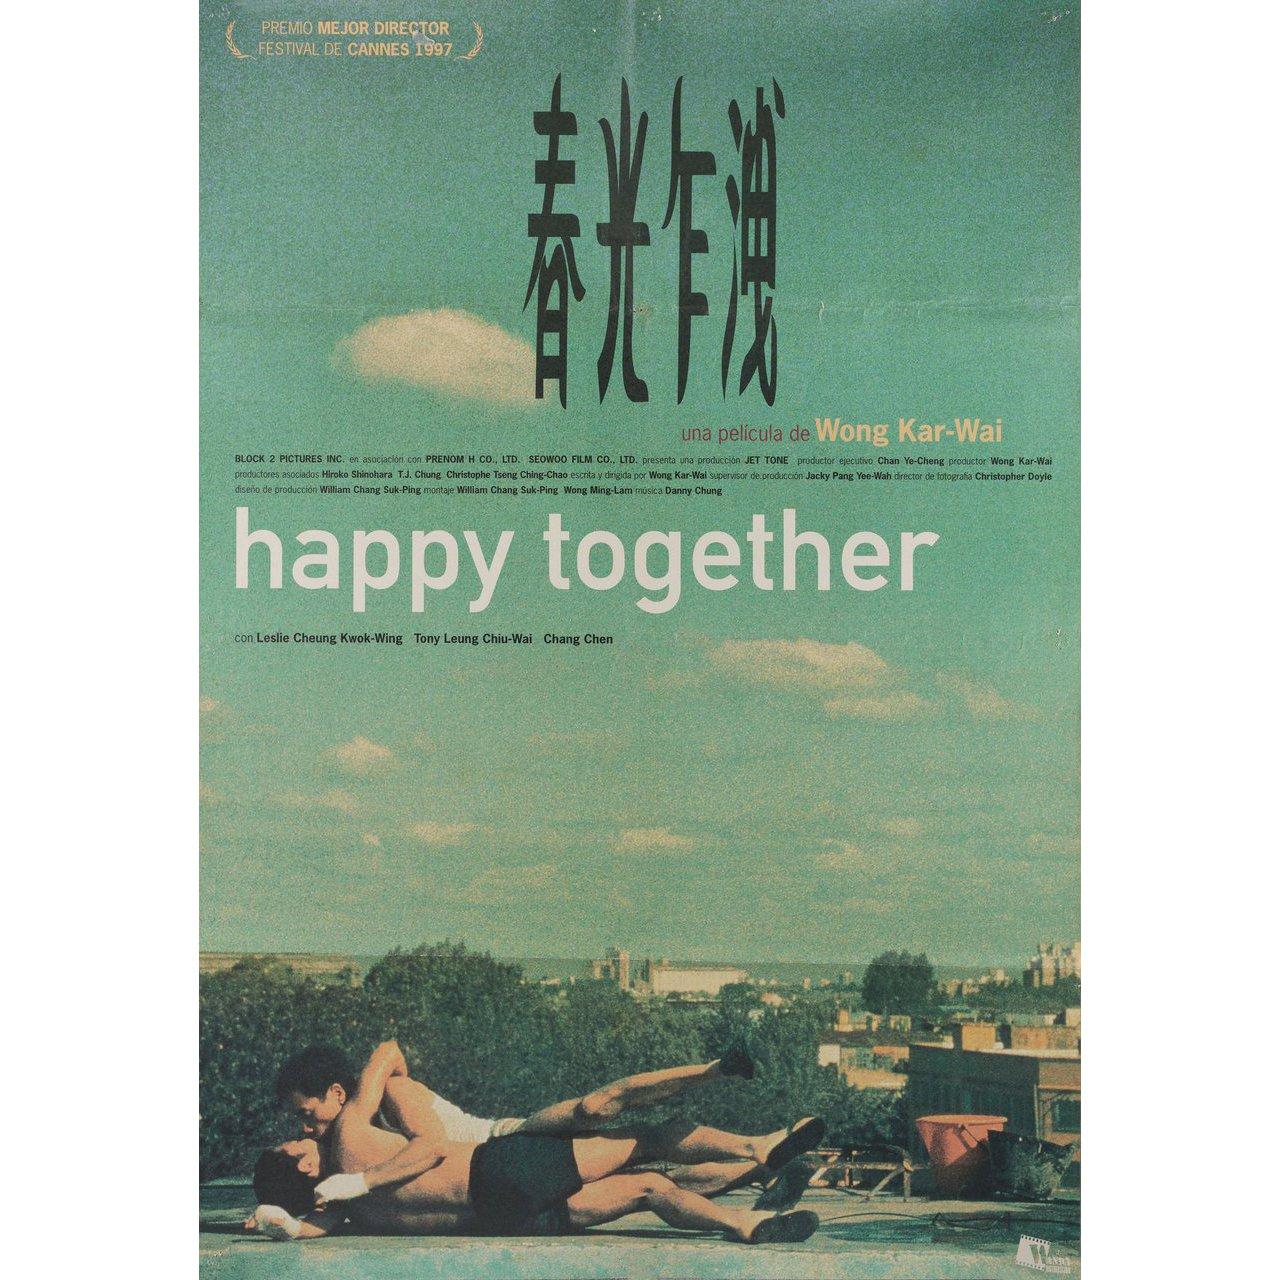 Original 1997 Spanish B1 poster for the film Happy Together (Chun gwong cha sit) directed by Kar Wai Wong with Leslie Cheung / Tony Chiu Wai Leung / Chen Chang / Gregory Dayton. Very Good-Fine condition, folded. Many original posters were issued